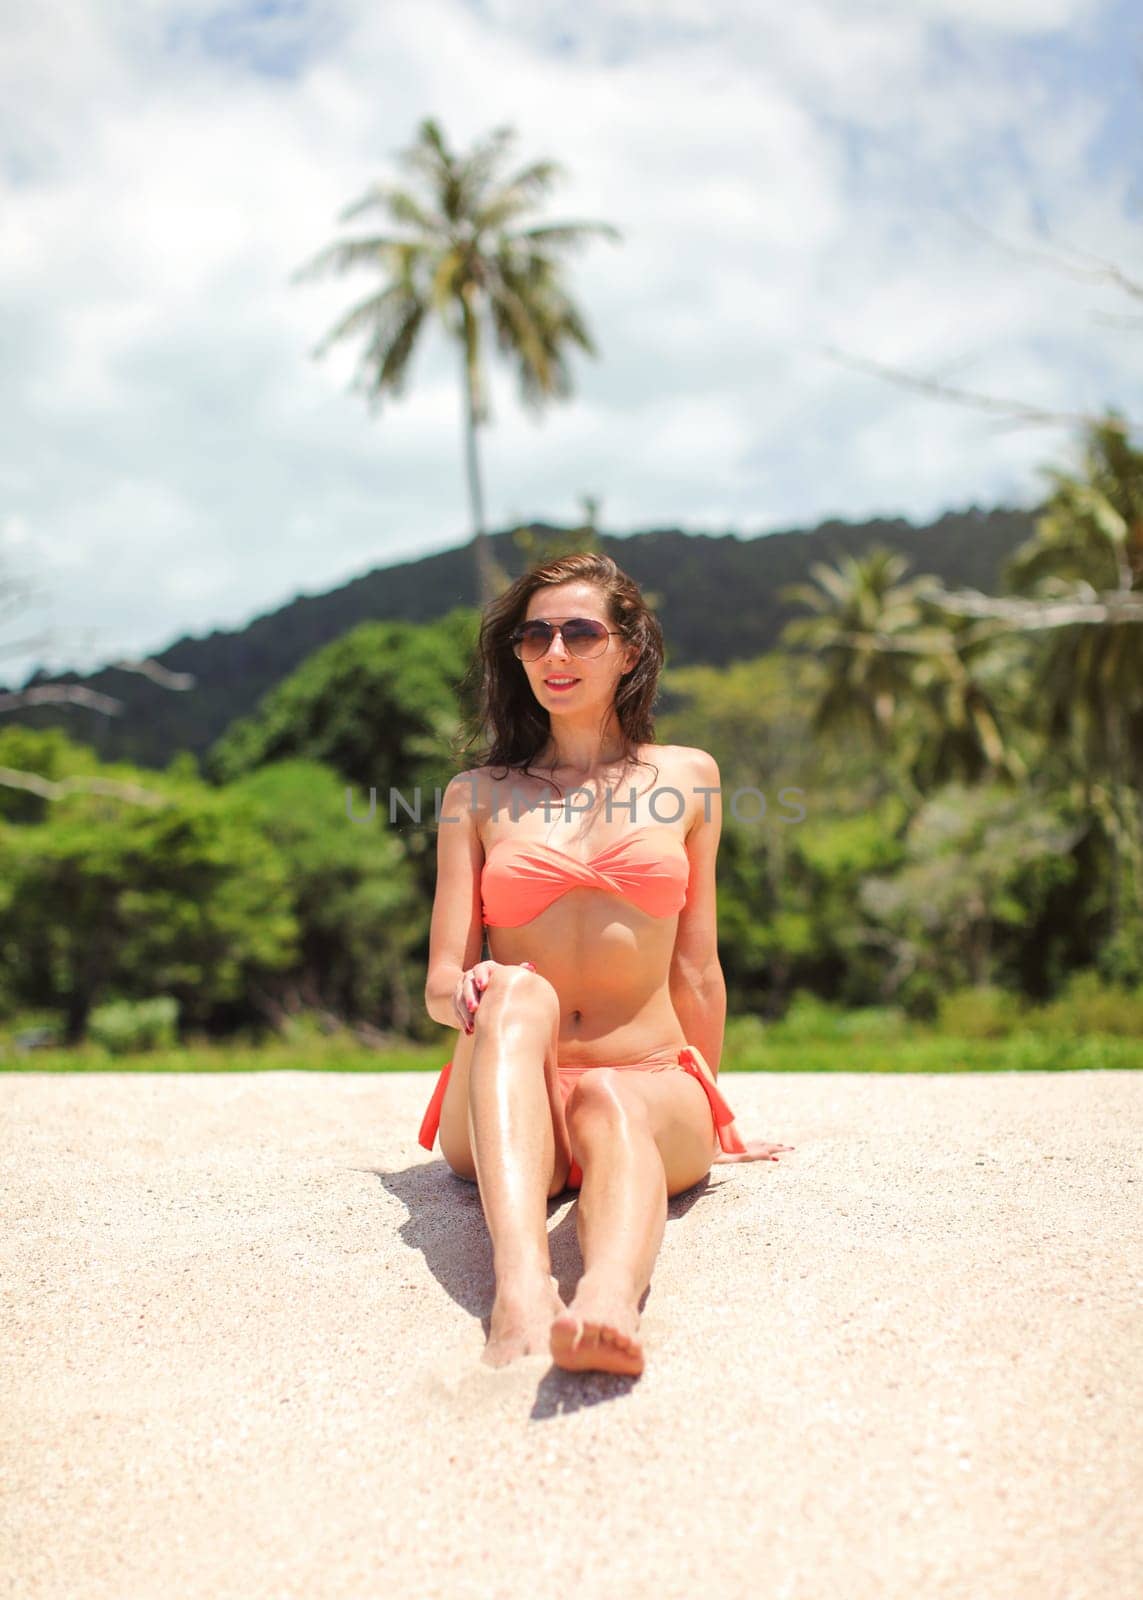 Young slim woman in bikini and sunglasses sitting on fine sand beach, jungle with palm trees behind her.